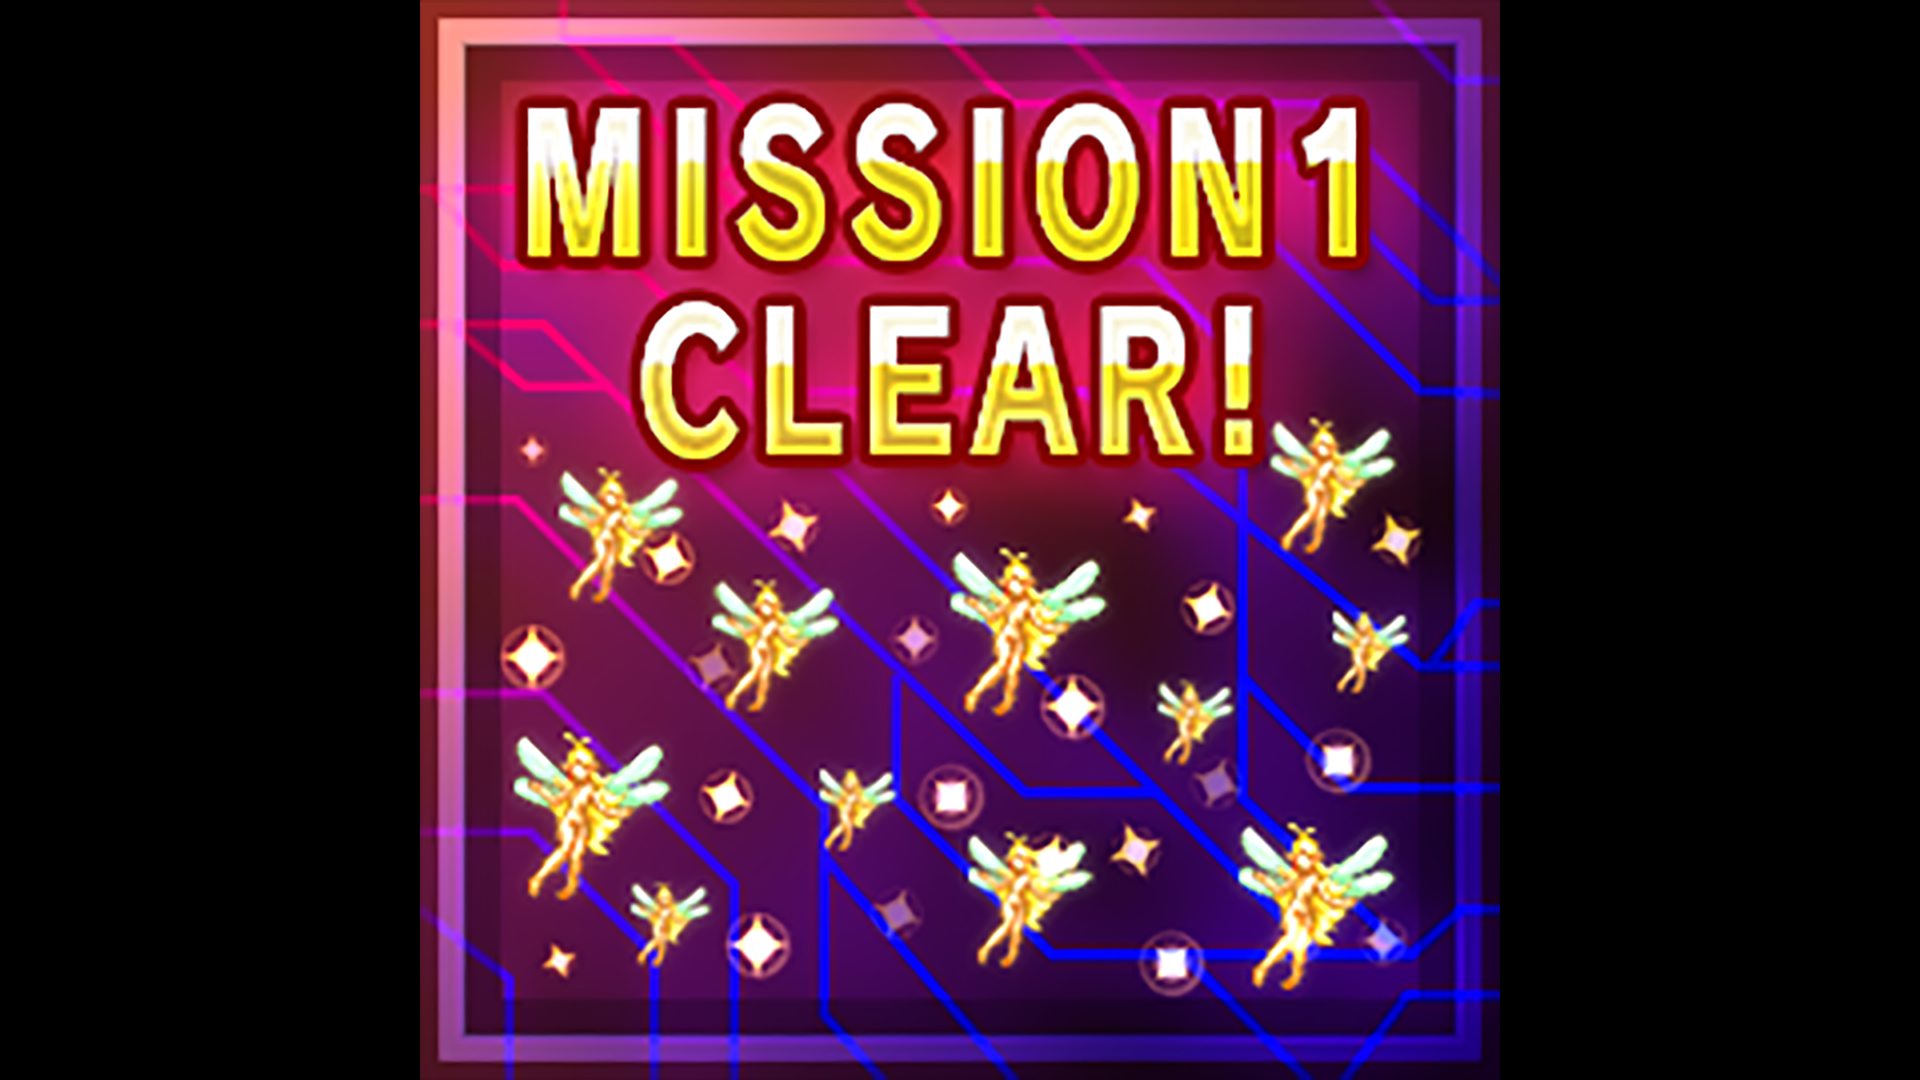 Icon for Special Mission 1 "Save the Fairies!"